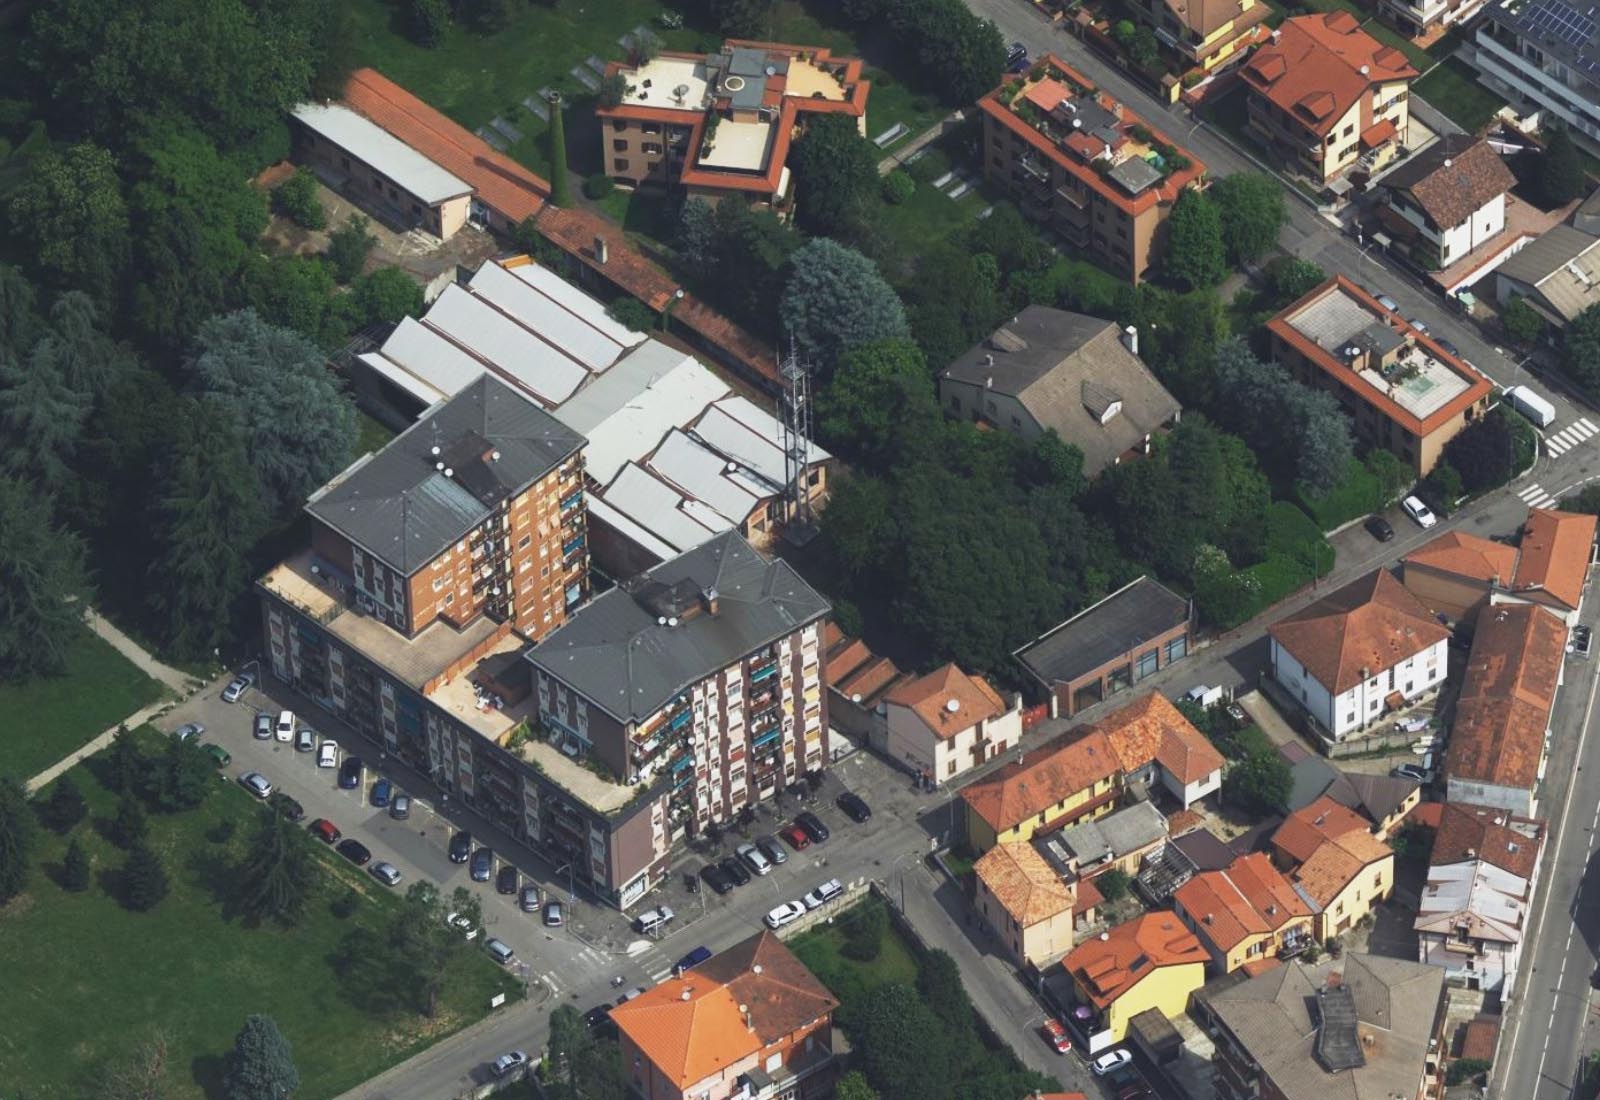 Residential buildings in Tavecchia street in Rho - Aerial view of the area